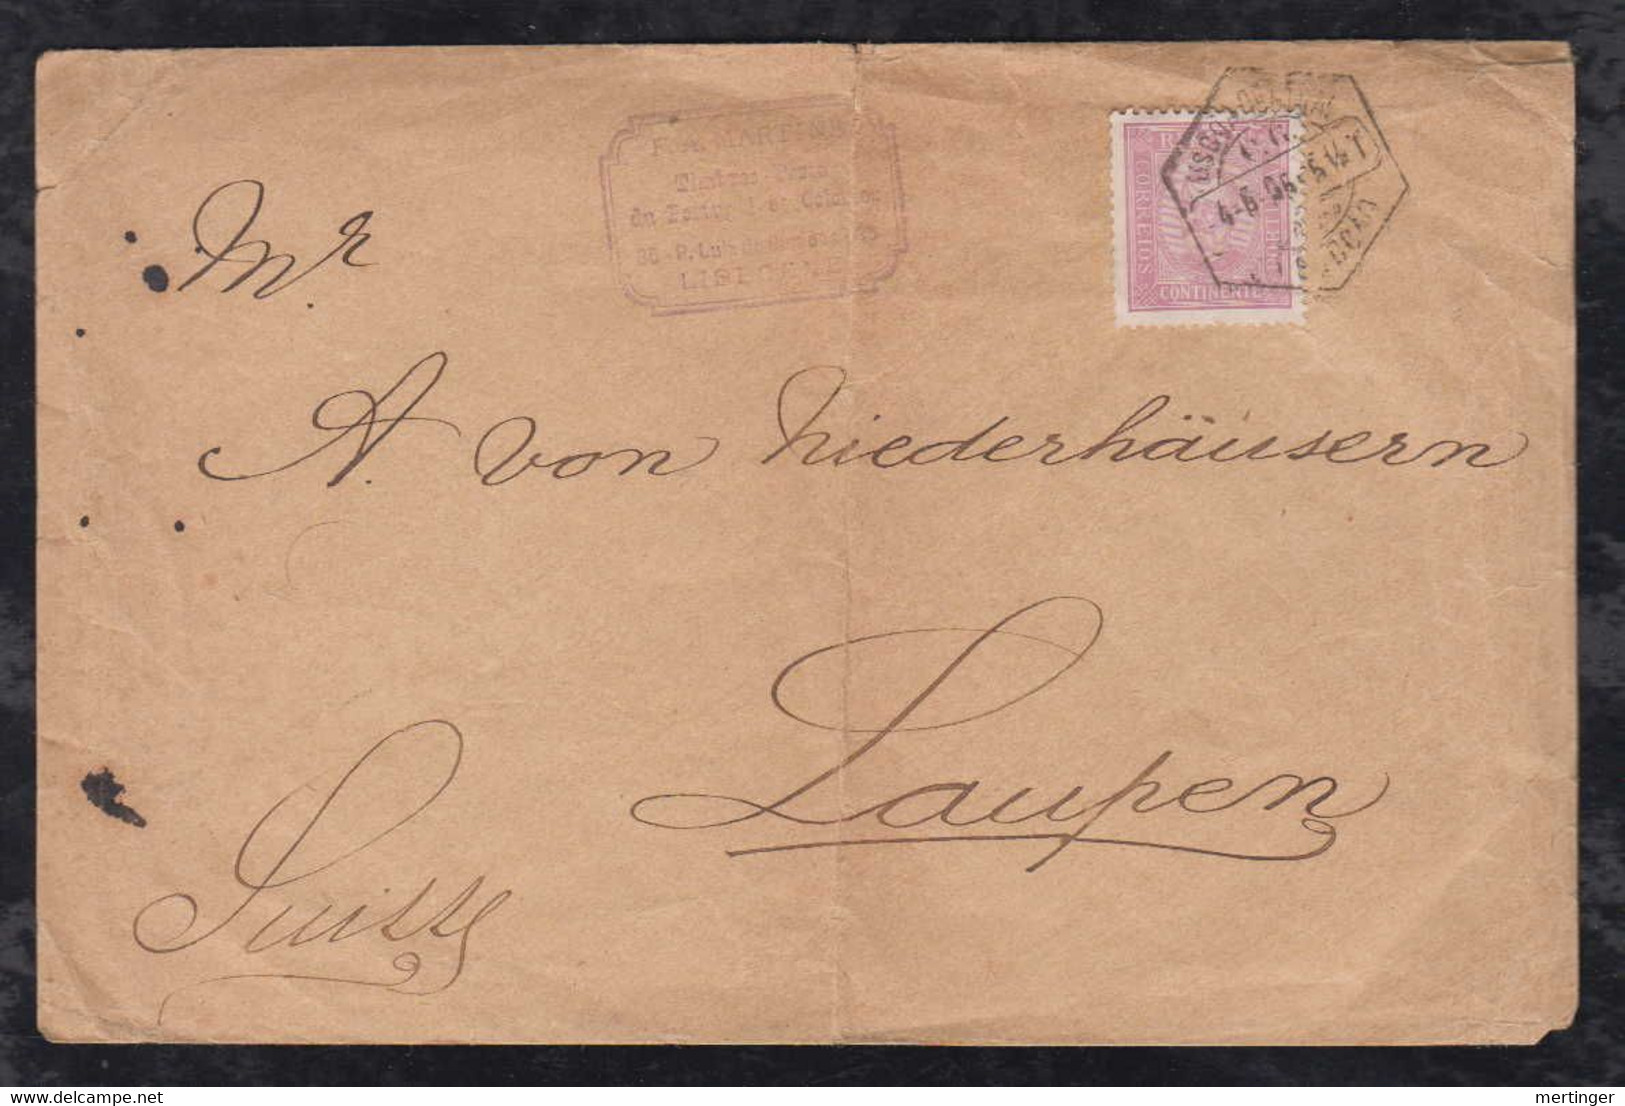 Portugal 1895 Printed Matter Cover  10R Single Use LISBOA To LAUPEN Switzerland - Lettres & Documents